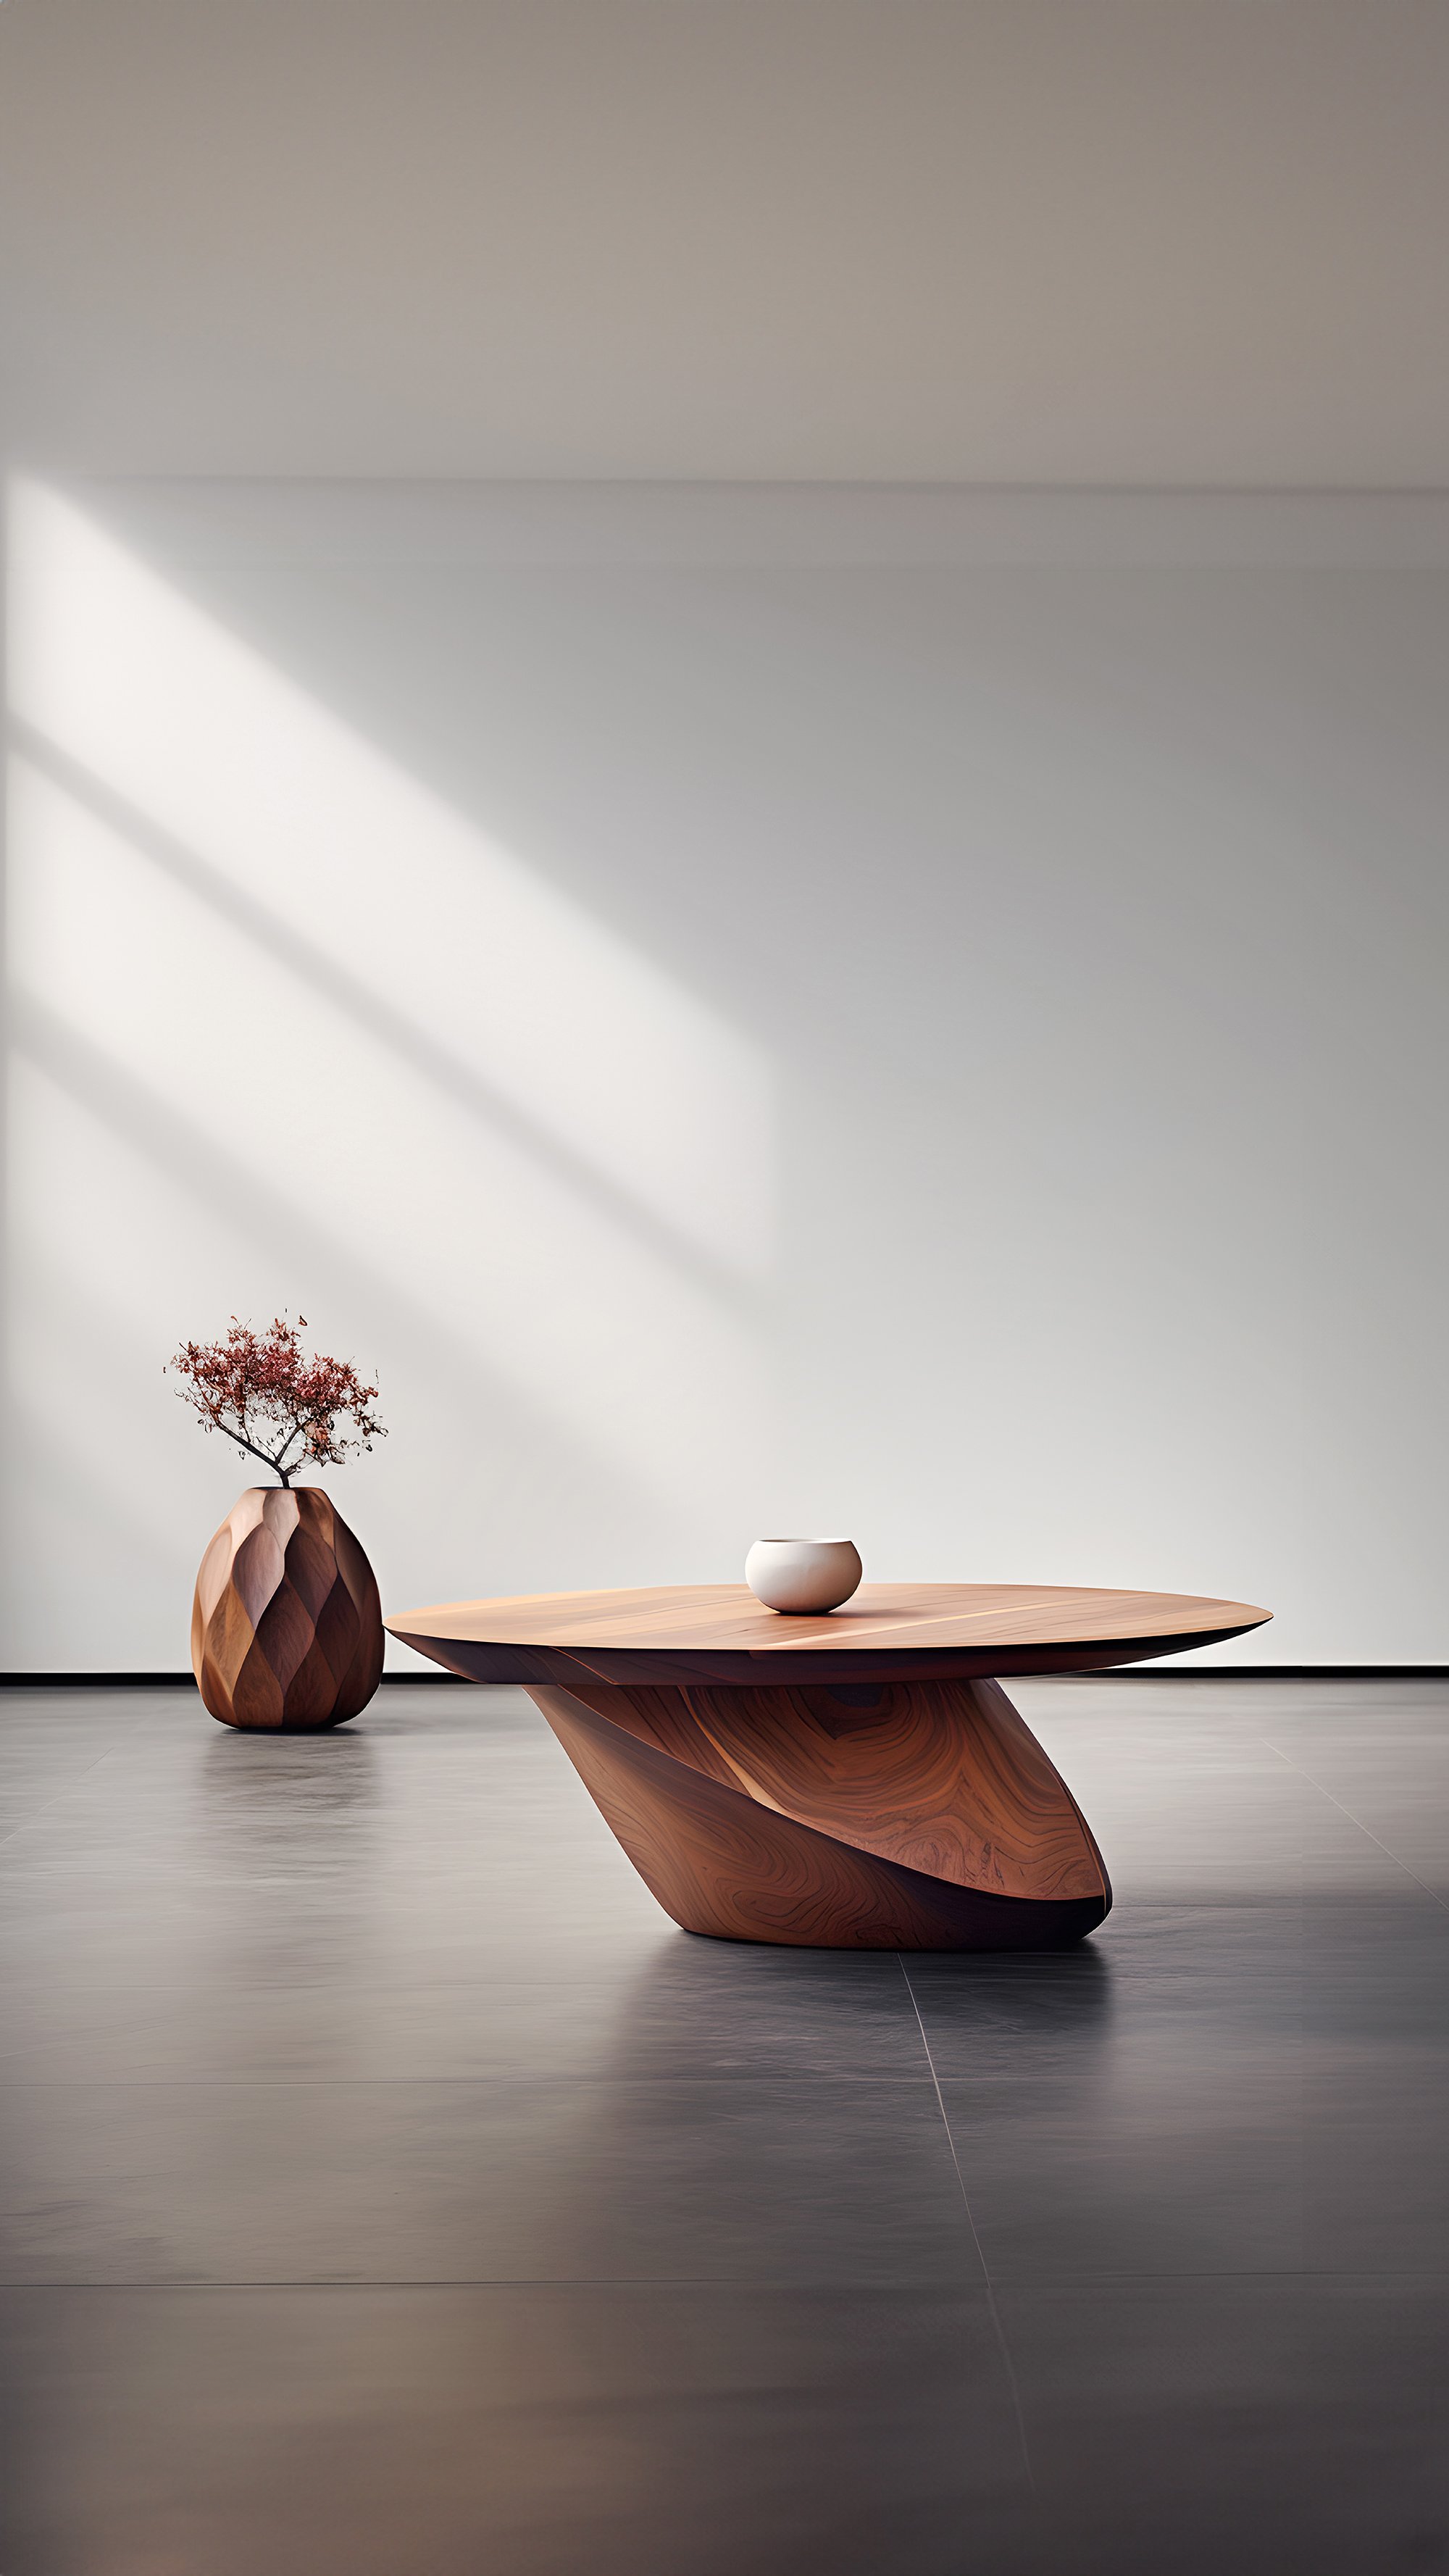 Sculptural Coffee Table Made of Solid Wood, Center Table Solace S40 by Joel Escalona — 9.jpg